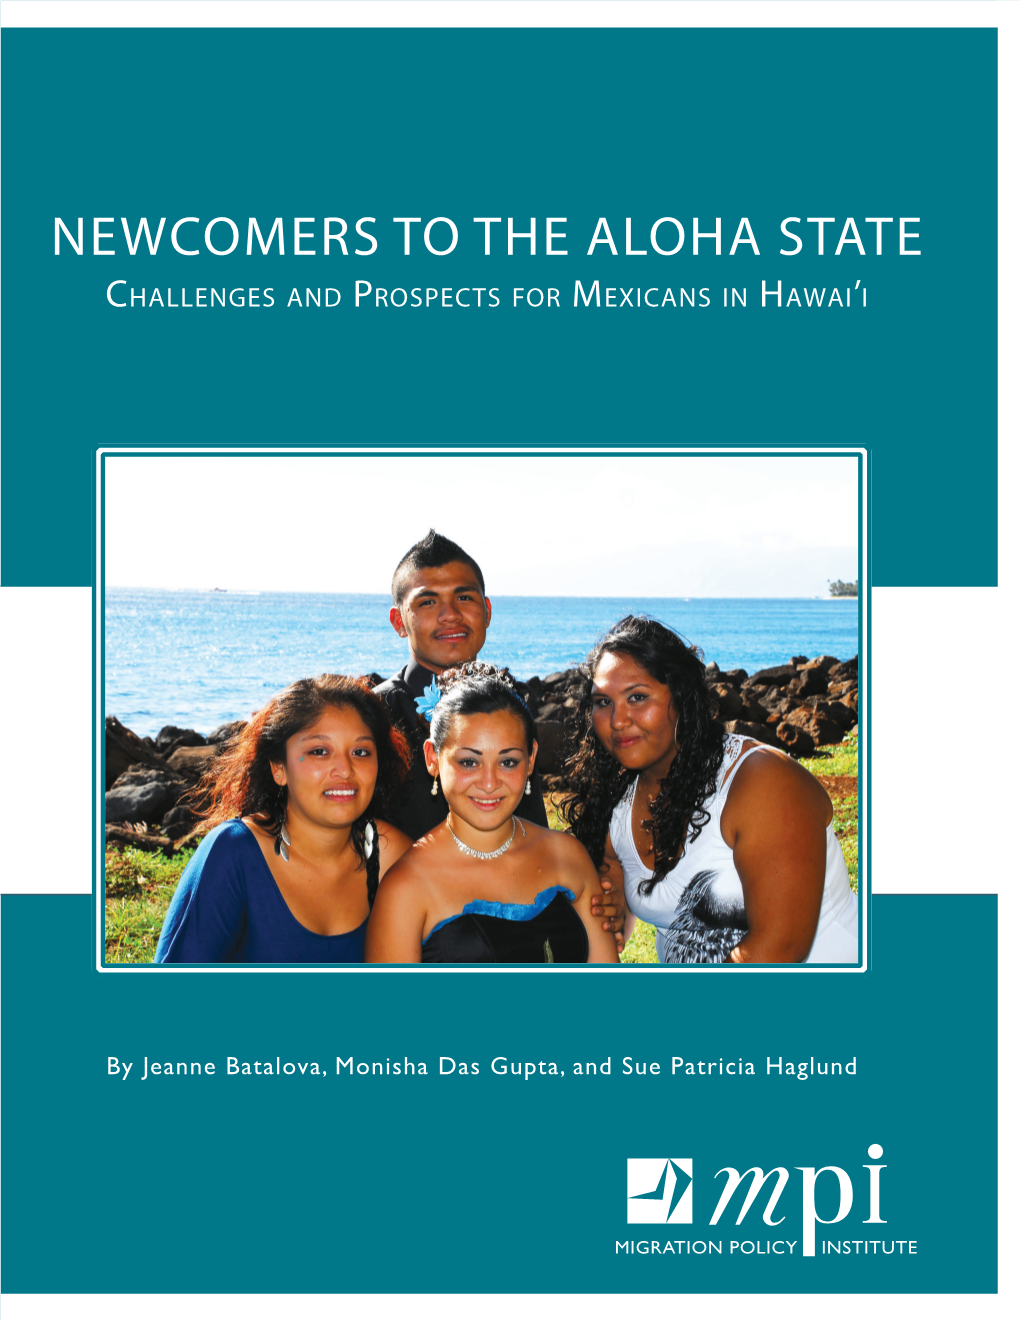 Challenges and Prospects of Mexicans in Hawaiʻi